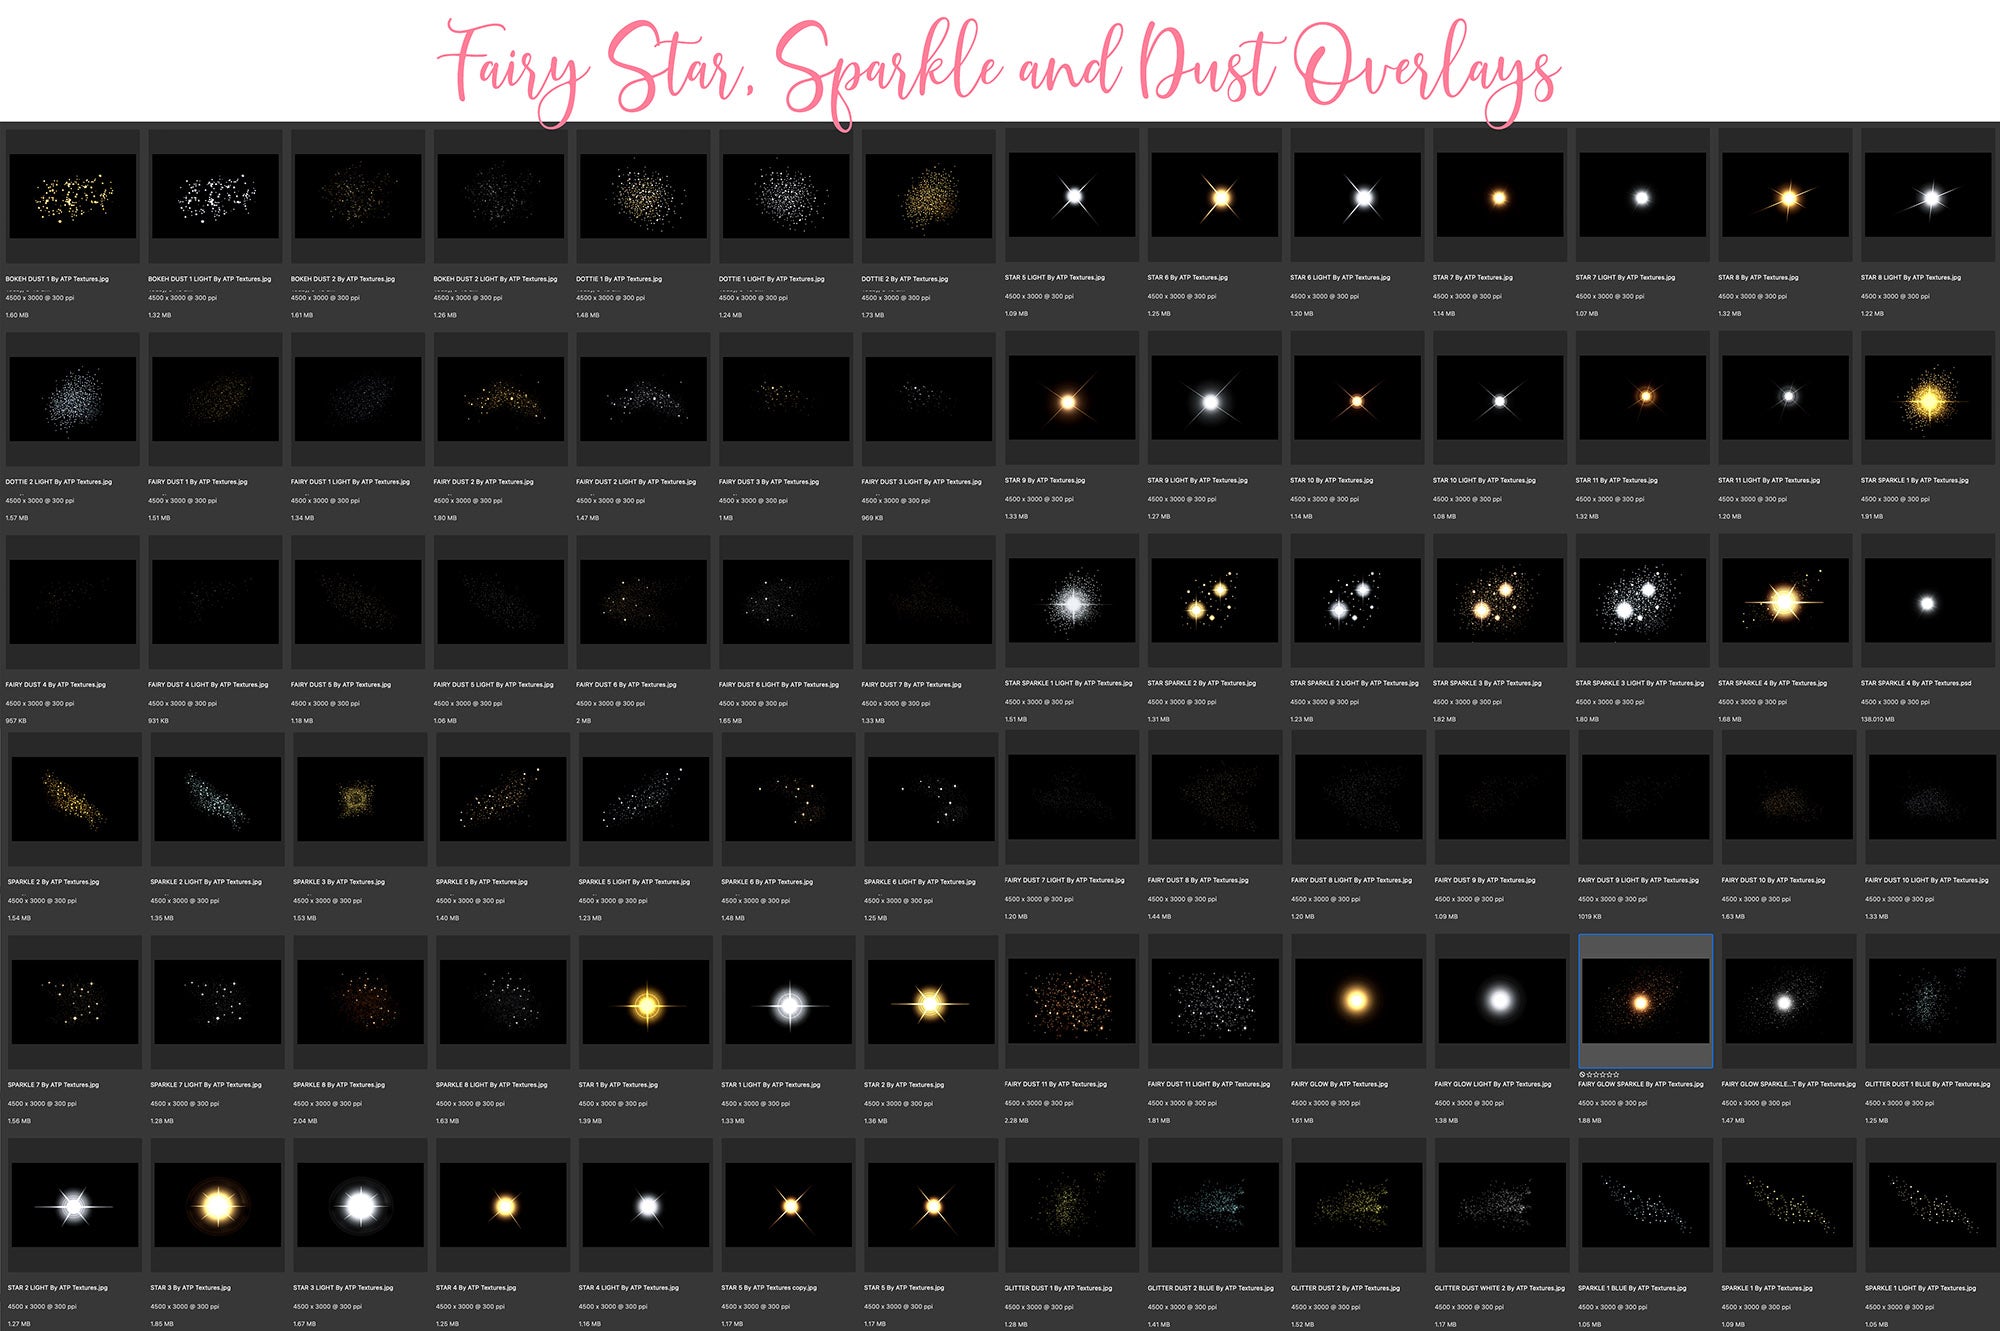 Png overlays for fine art photography and magical edits.  Png Magical Overlays, Fairy dust, Fairy Sparkles, sparkle overlay, photo overlays by ATP textures.